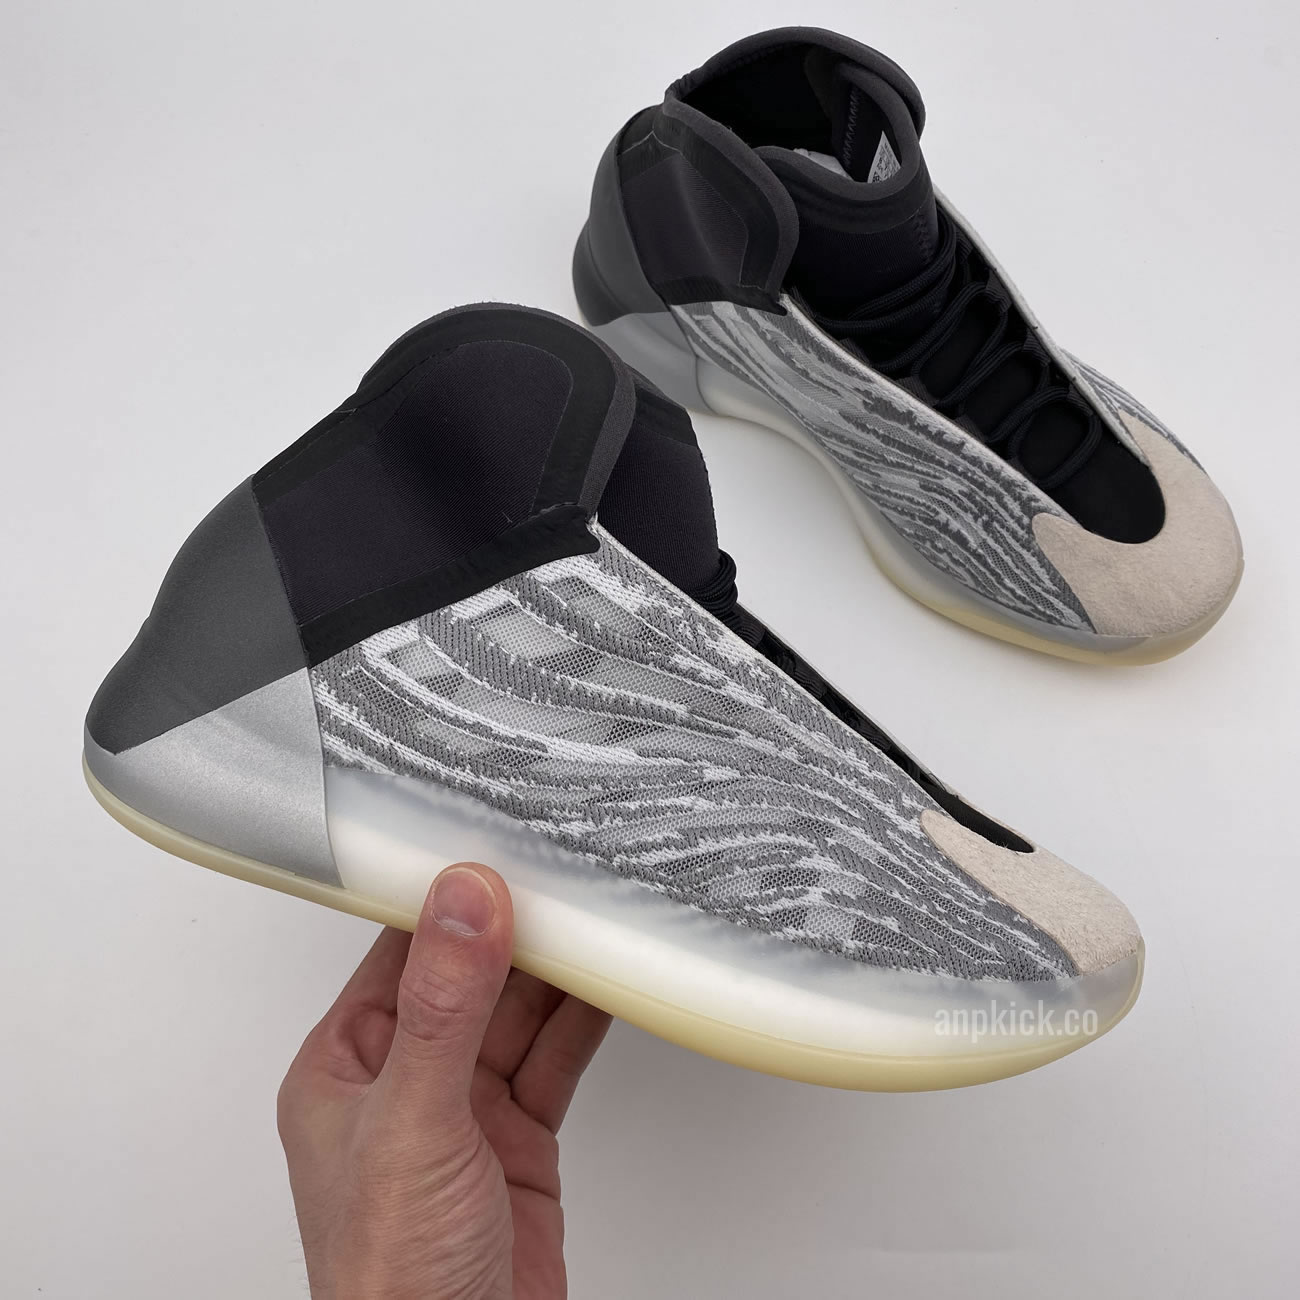 Adidas Yeezy Basketball Quantum Boost For Sale New Release Eg1535 (8) - newkick.org